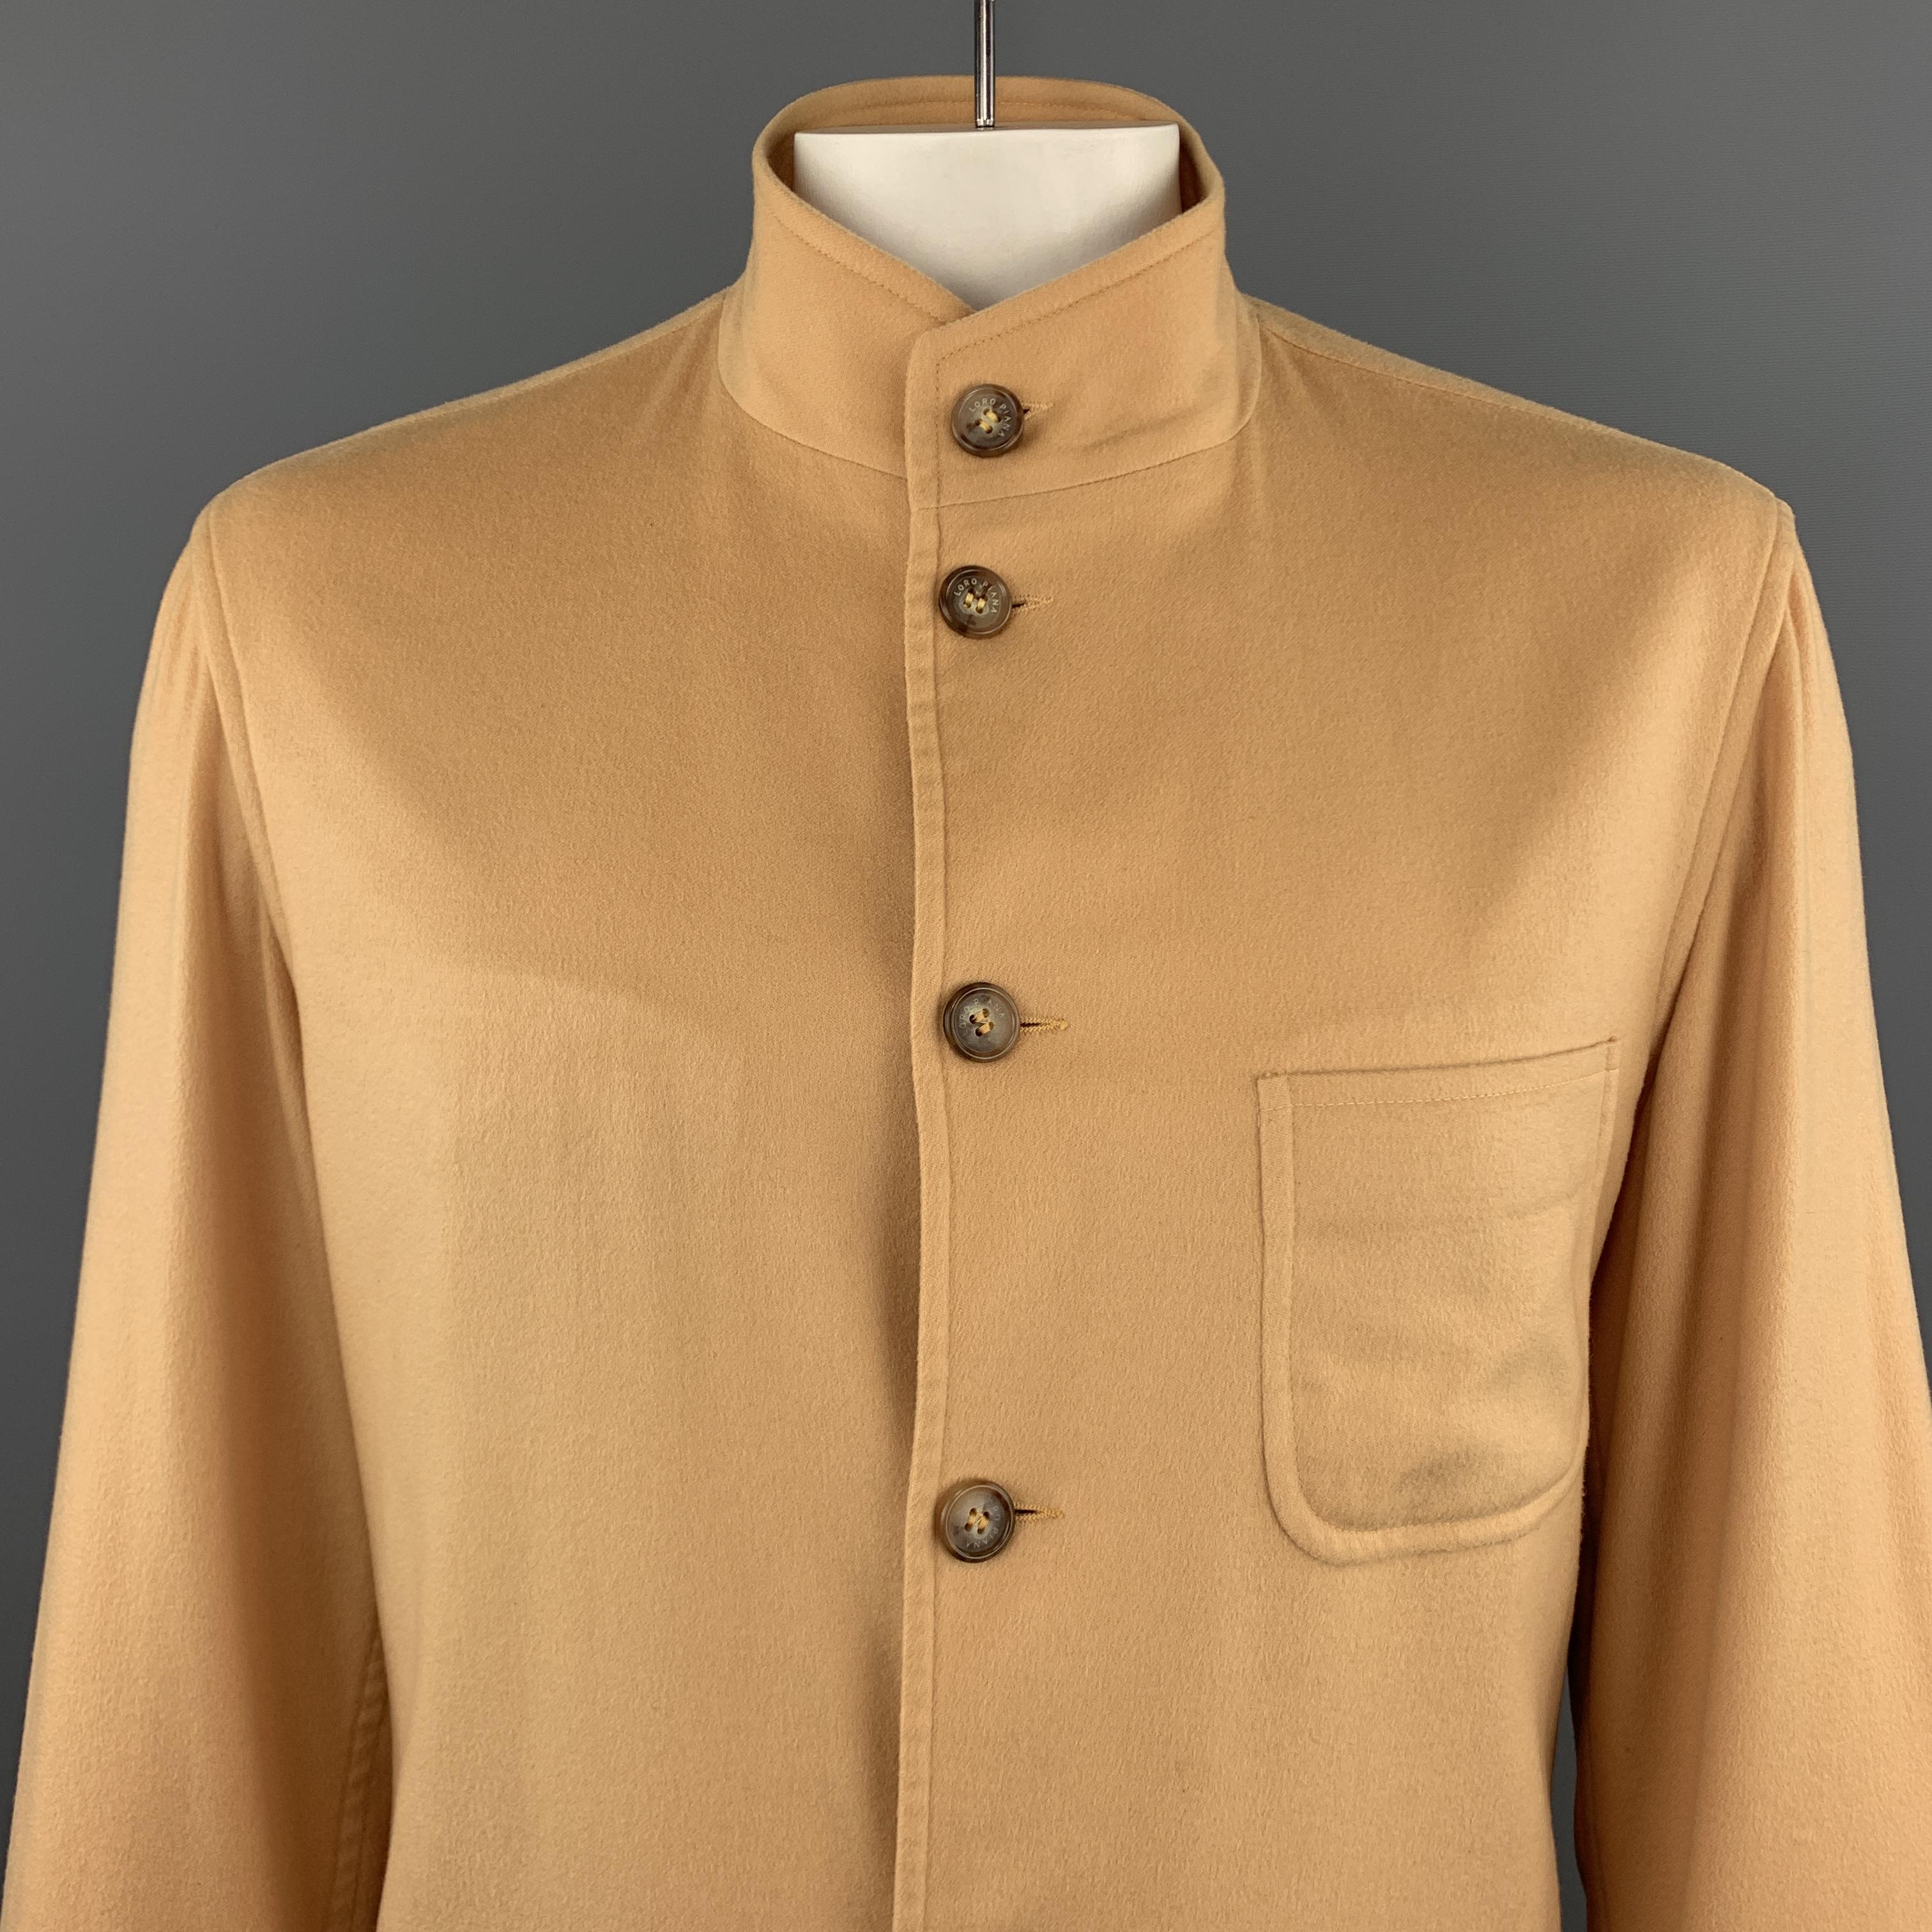 Vintage LORO PIANA jacket comes in soft khaki cashmere with a Nehru collar, button up front, and patch pockets. Made in Italy.
 
Excellent Pre-Owned Condition.
Marked: EU 40
 
Measurements:
 
Shoulder: 20 in.
Chest: 48 in.
Sleeve: 24 in.
Length: 32